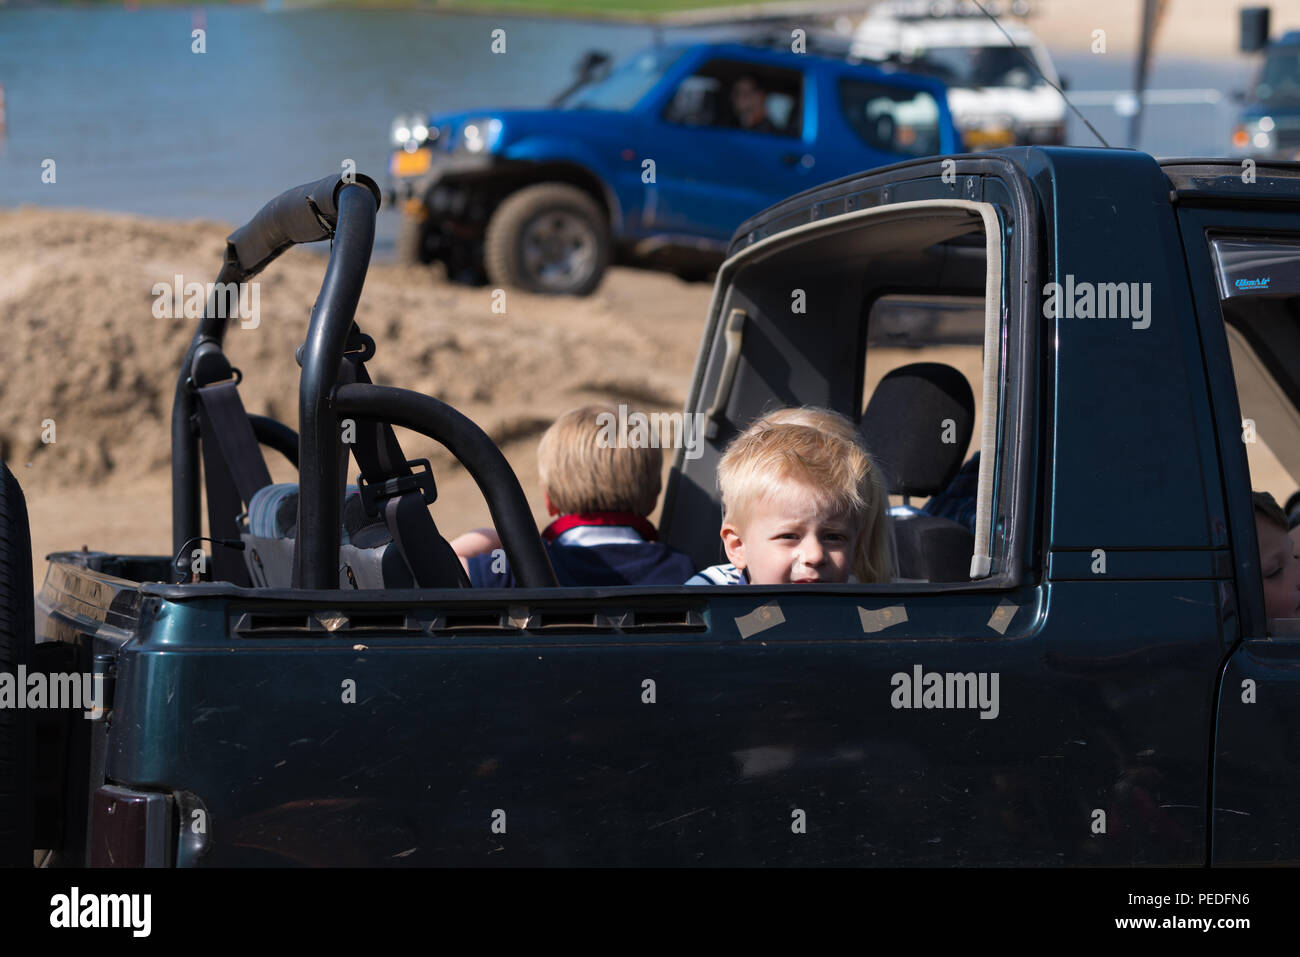 OLDENZAAL NETHERLANDS - APRIL 9, 2017: Unknown kids in an open backseat of an offroad car during an annual event Stock Photo